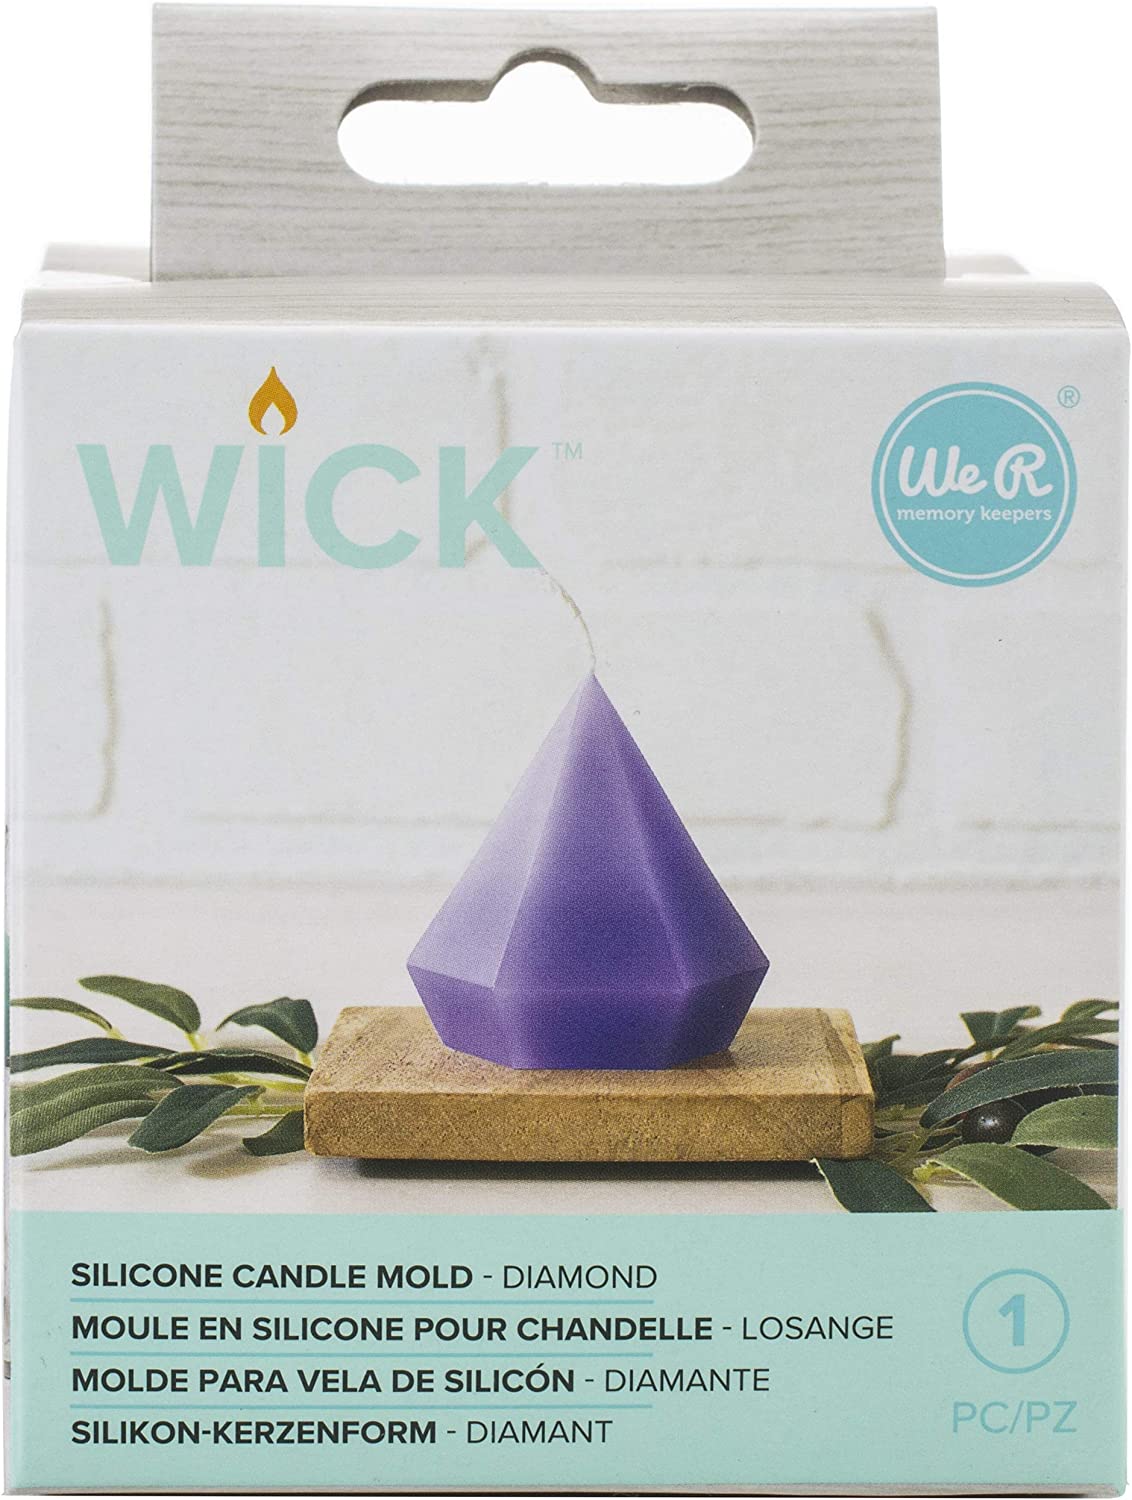 We R Memory Keepers 0633356603450 Candle Molds Wick-Diamond